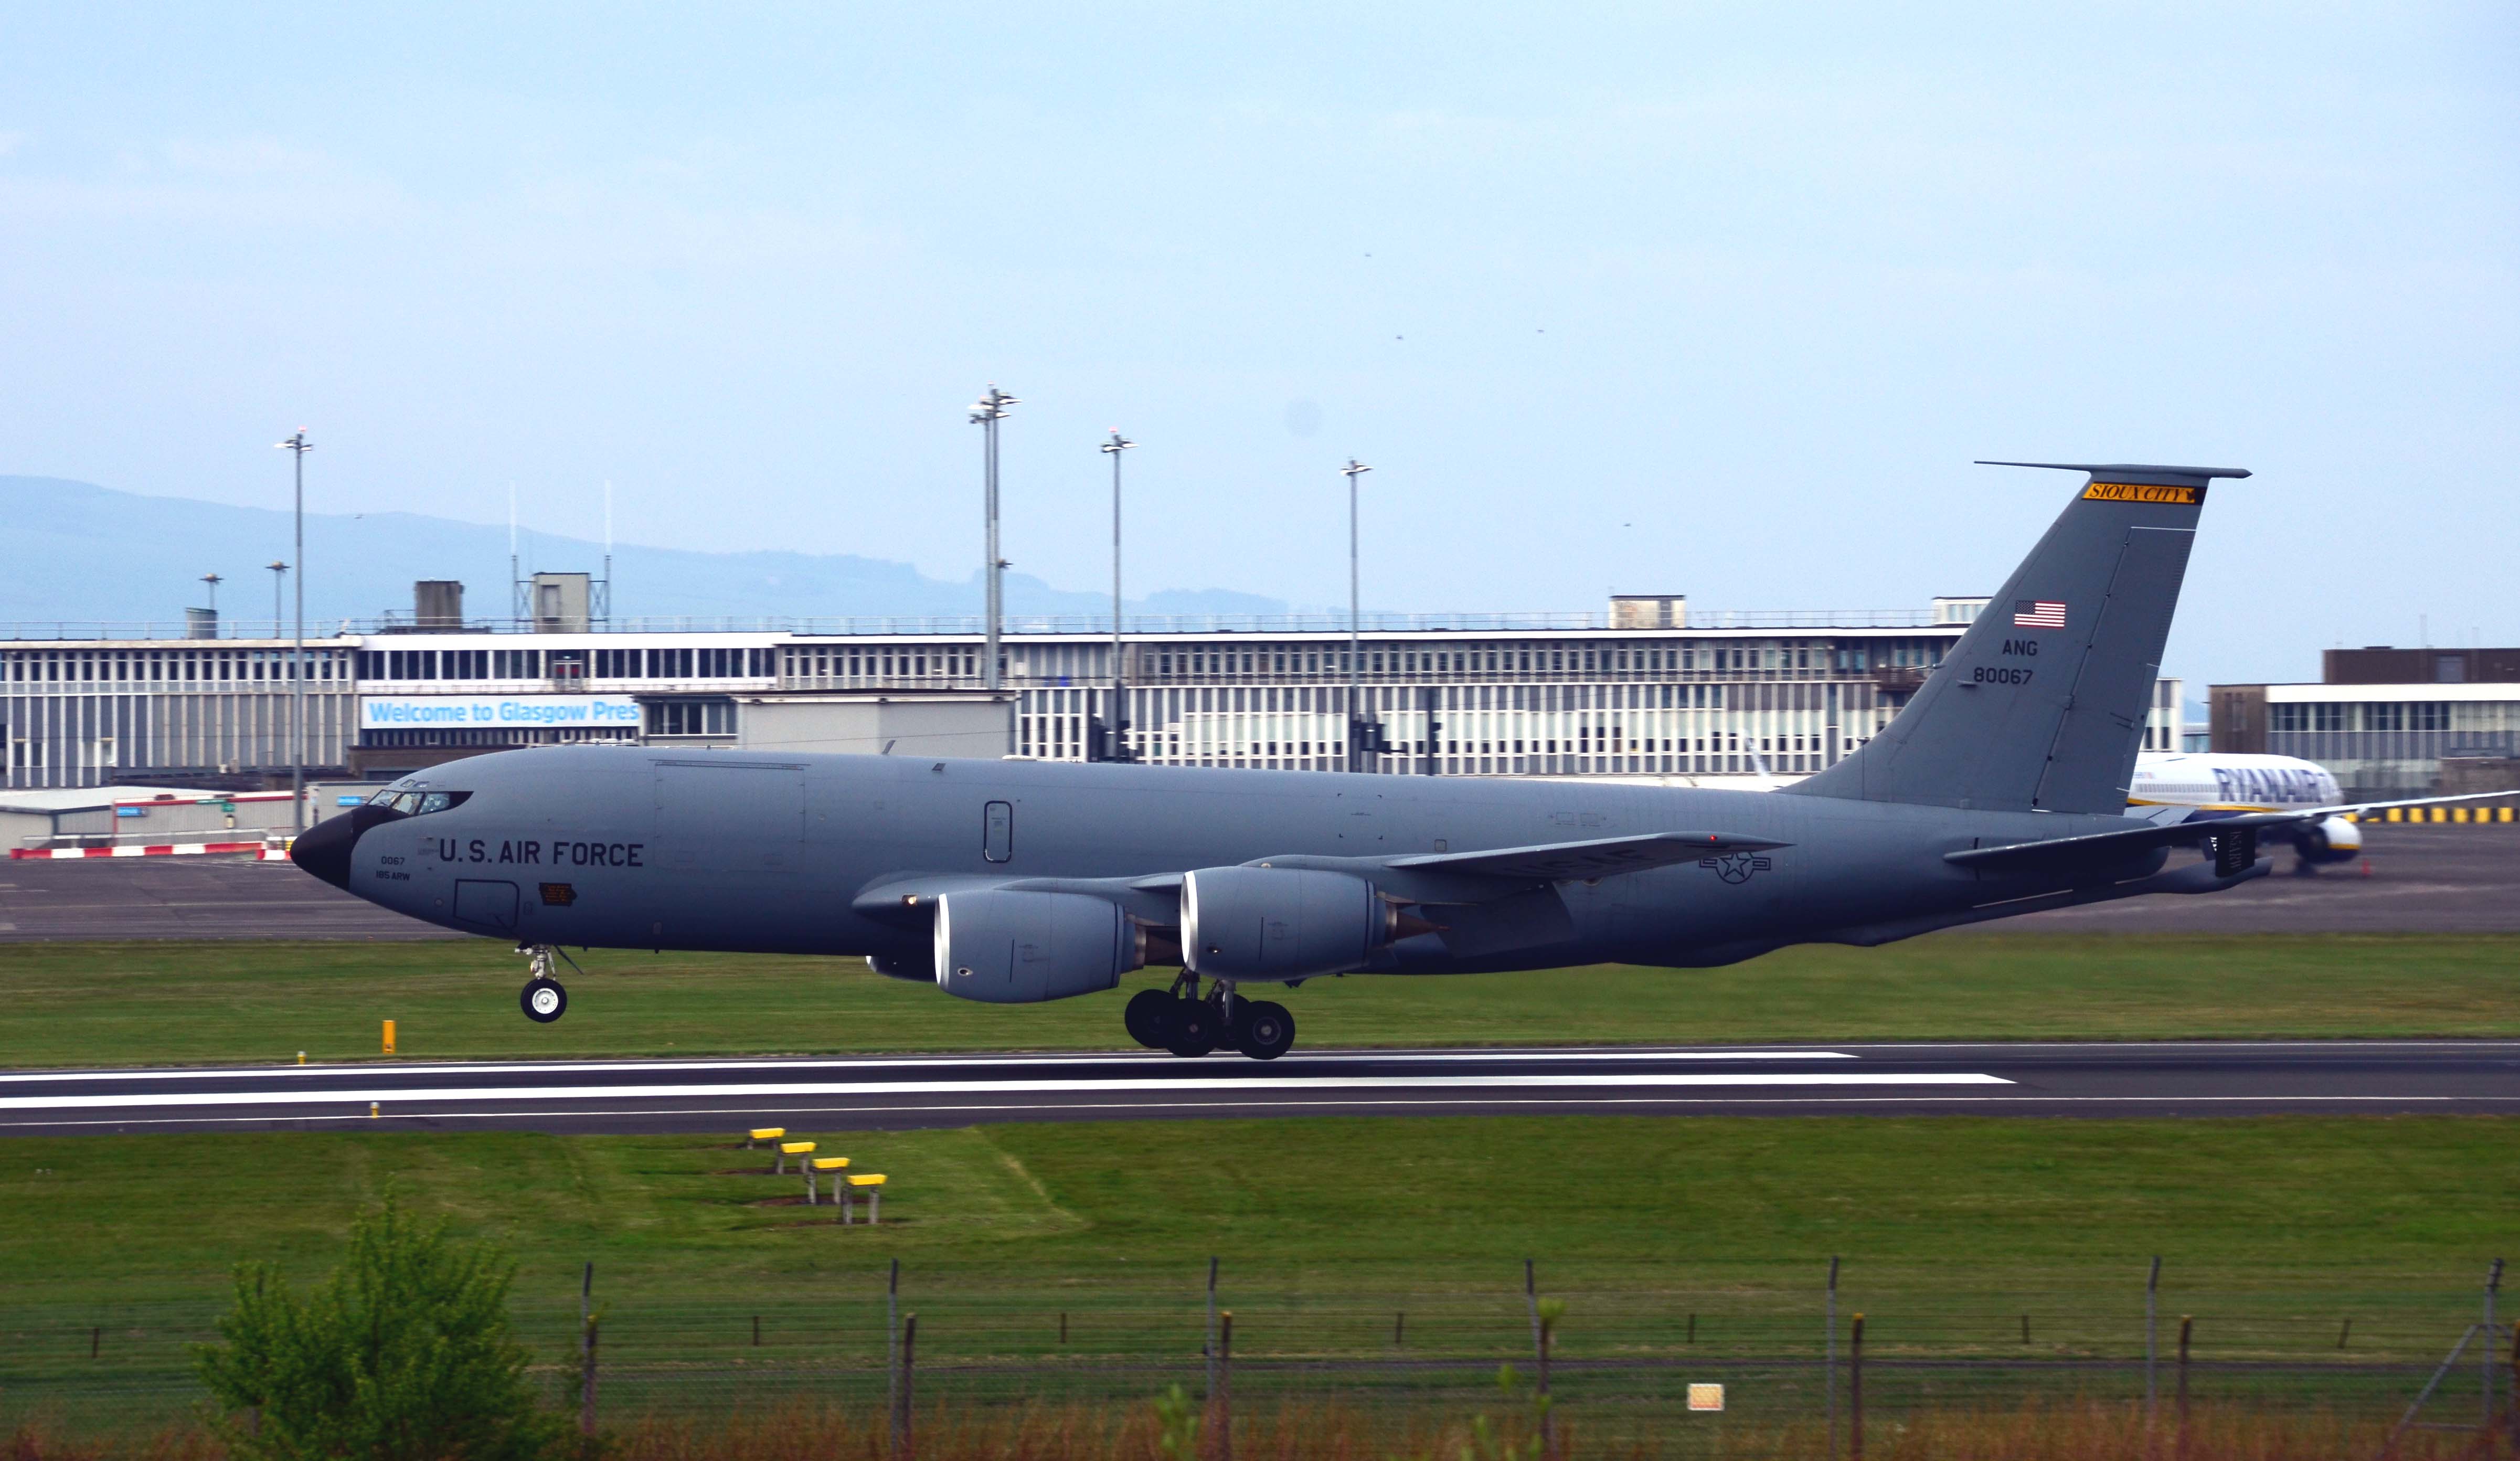 58-0067/580067 USAF - United States Air Force Boeing KC-135R Stratotanker Photo by FlyDroo - AVSpotters.com